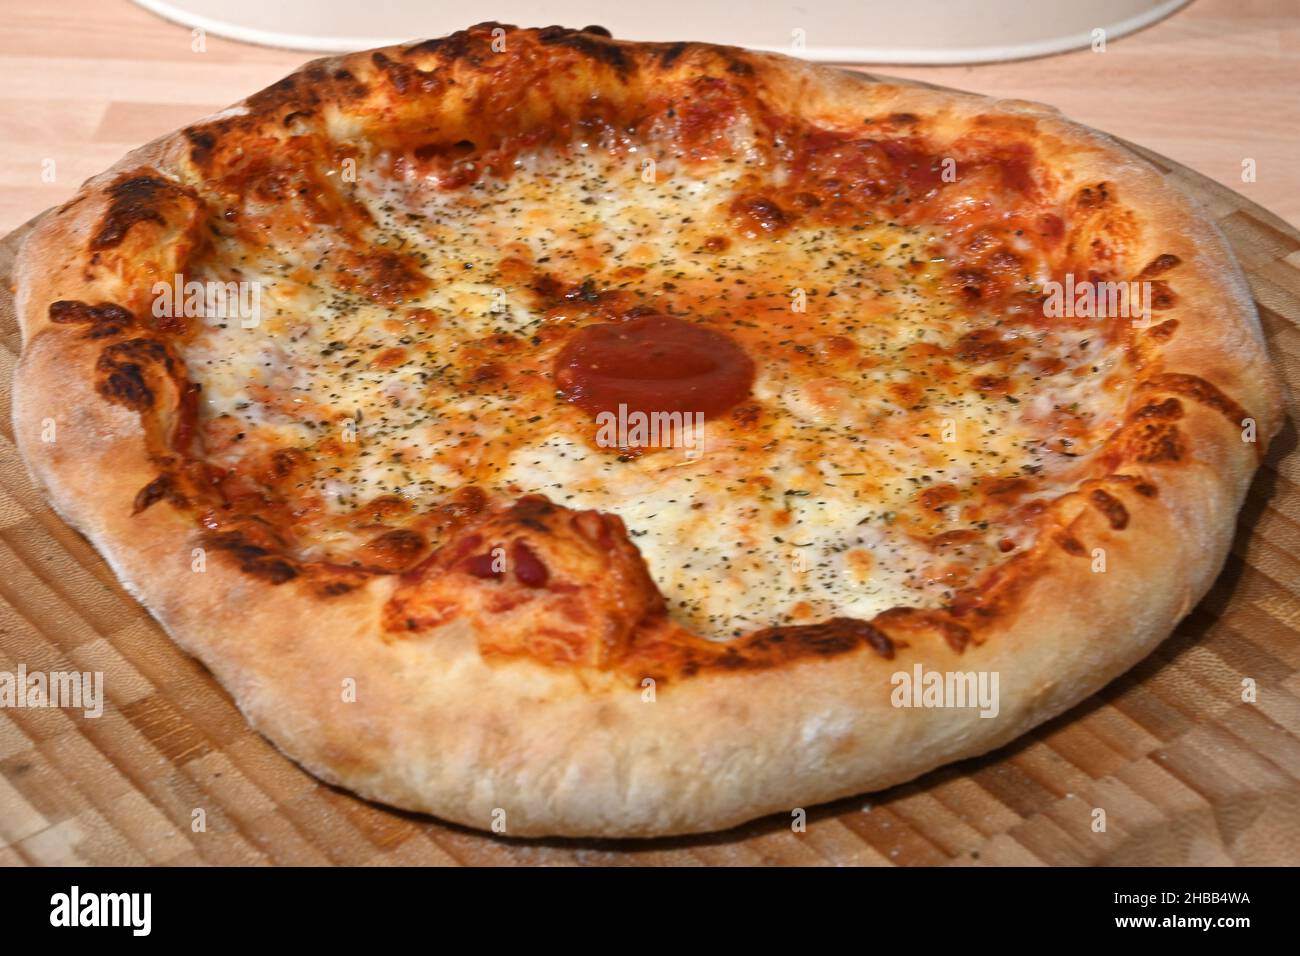 stone baked Neapolitan pizza cooked in a pizza oven Stock Photo